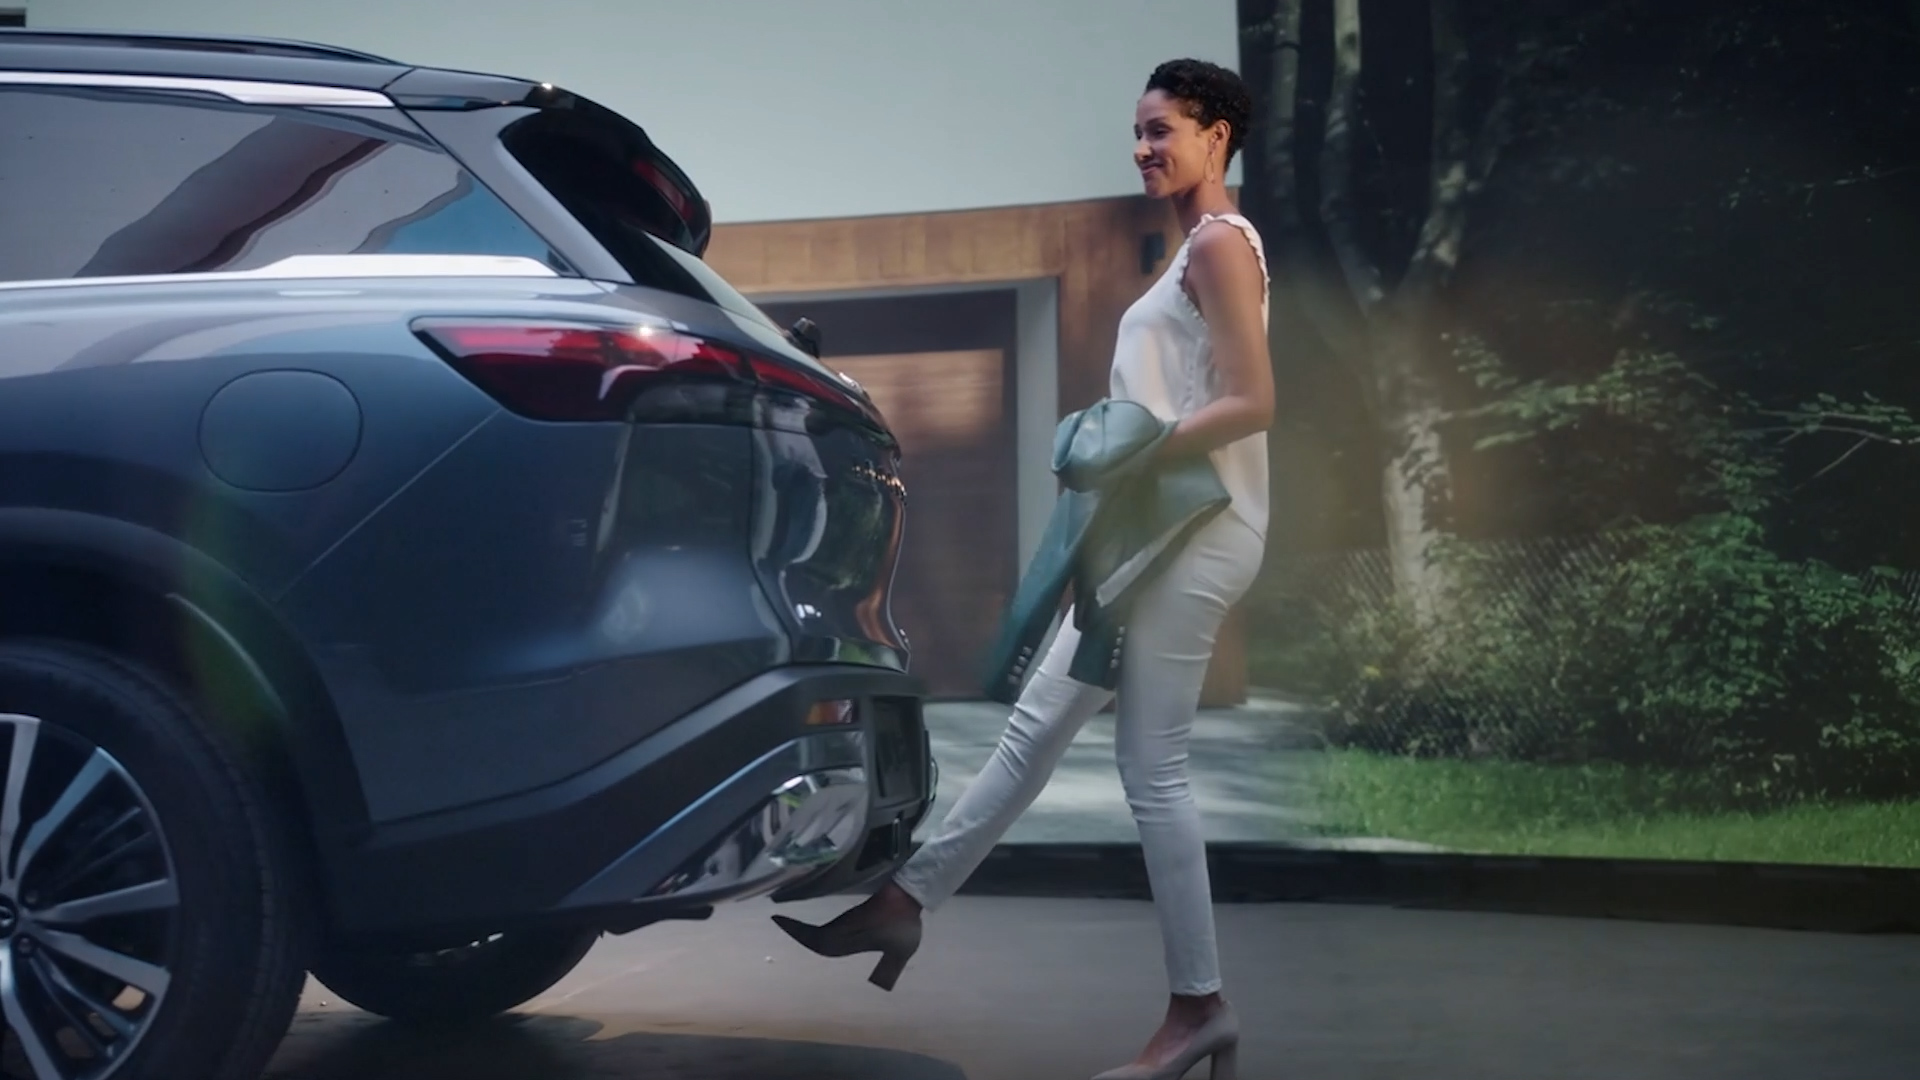 2023 INFINITI QX60 Crossover SUV parked with woman walking behind vehicle